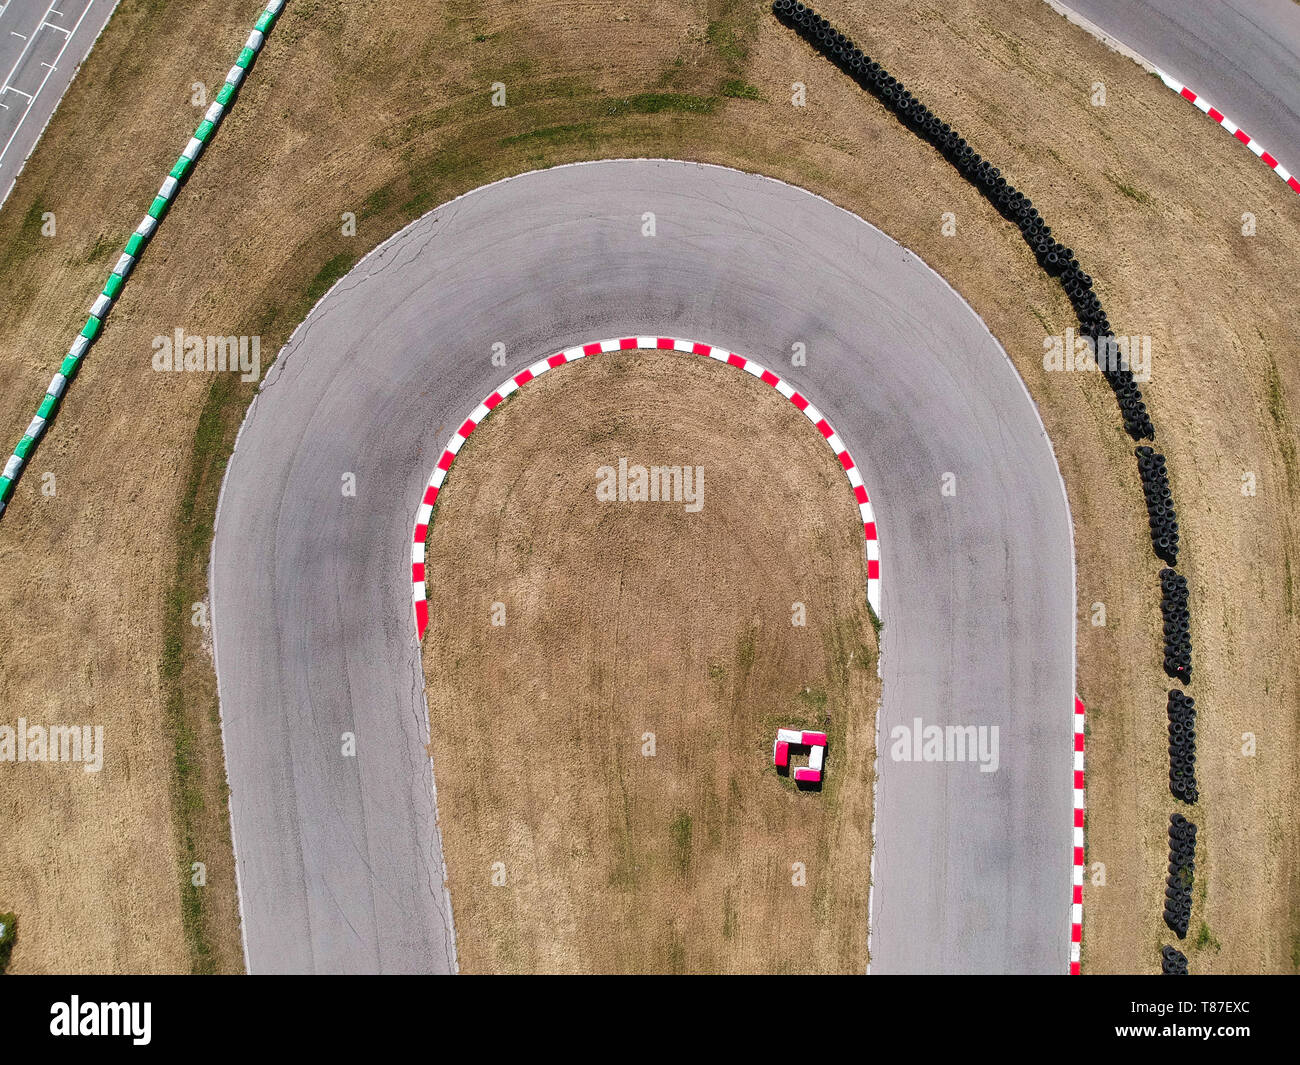 Curves on karting race track, aerial view background. Stock Photo